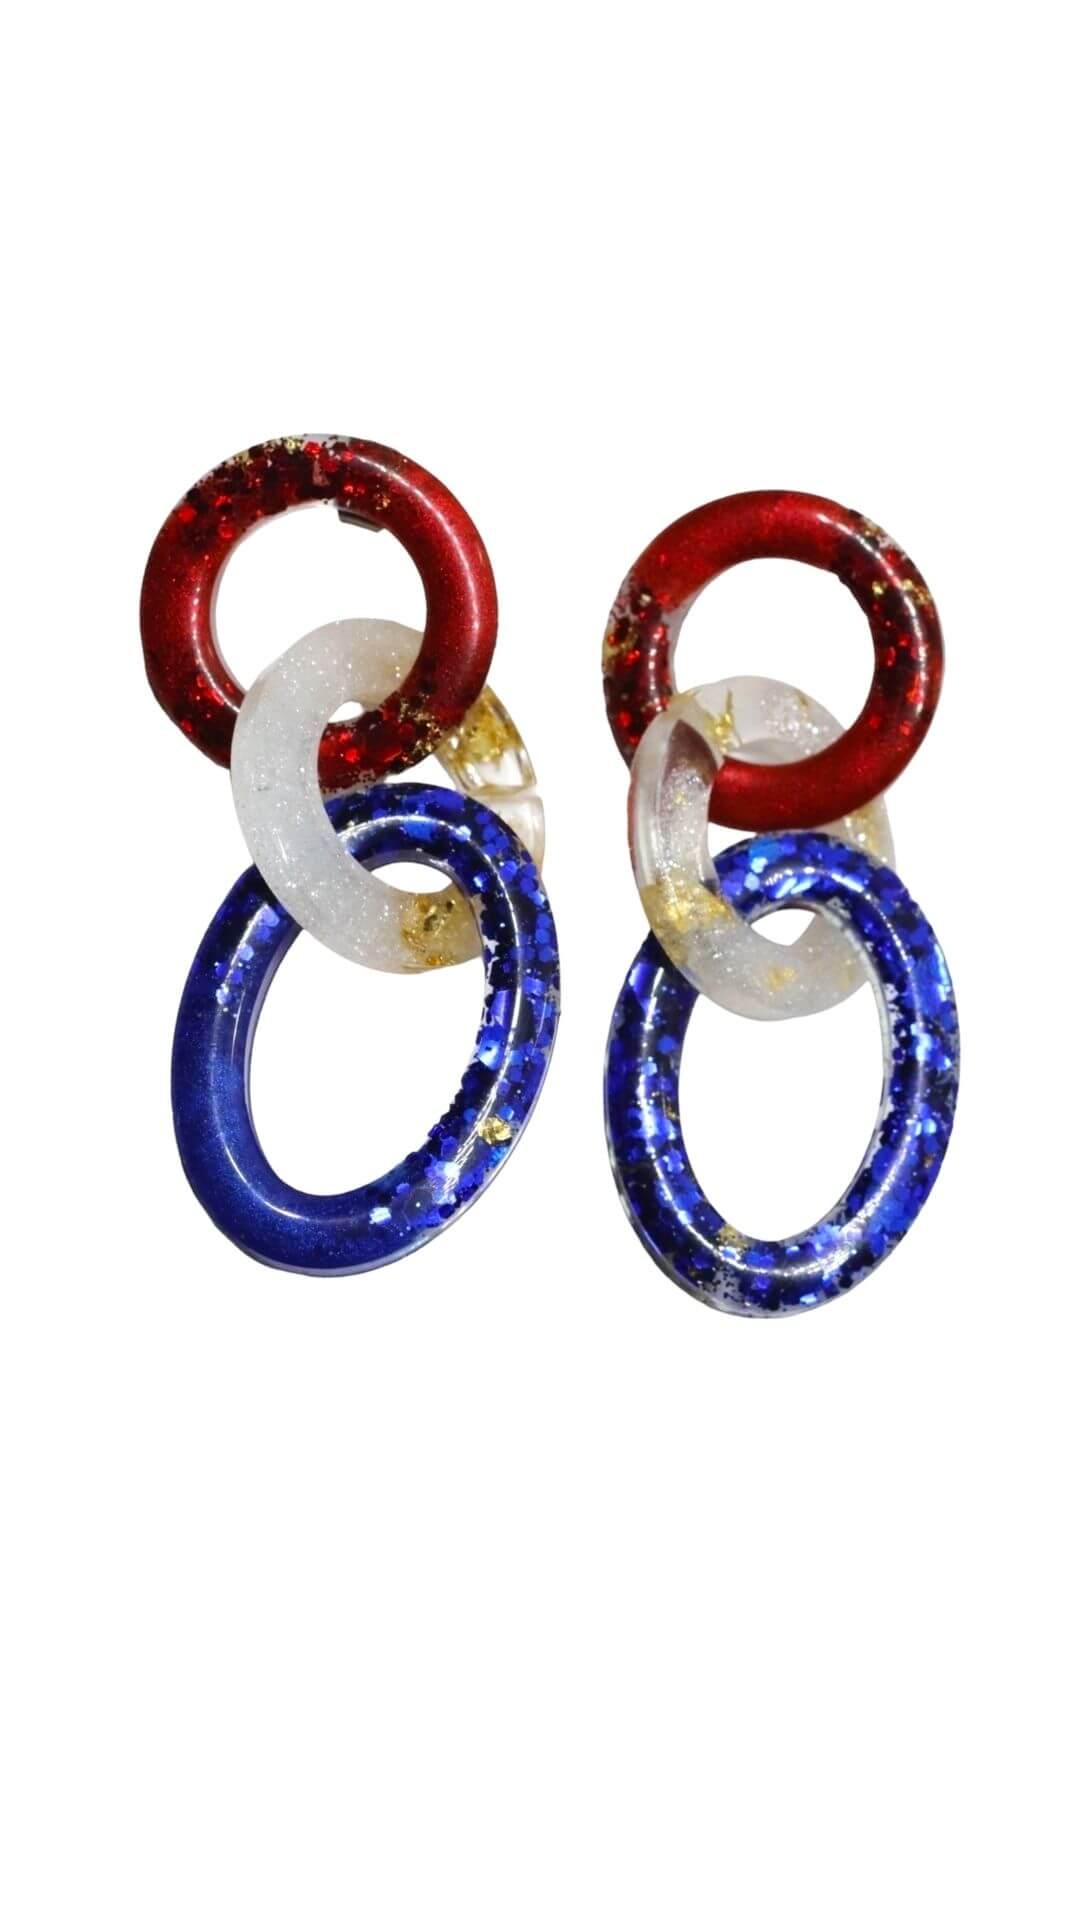 glittery-patriotic-link-earrings---hypoallergenic---red-white-and-blue-earrings---kaleidoscopes-and-polka-dots